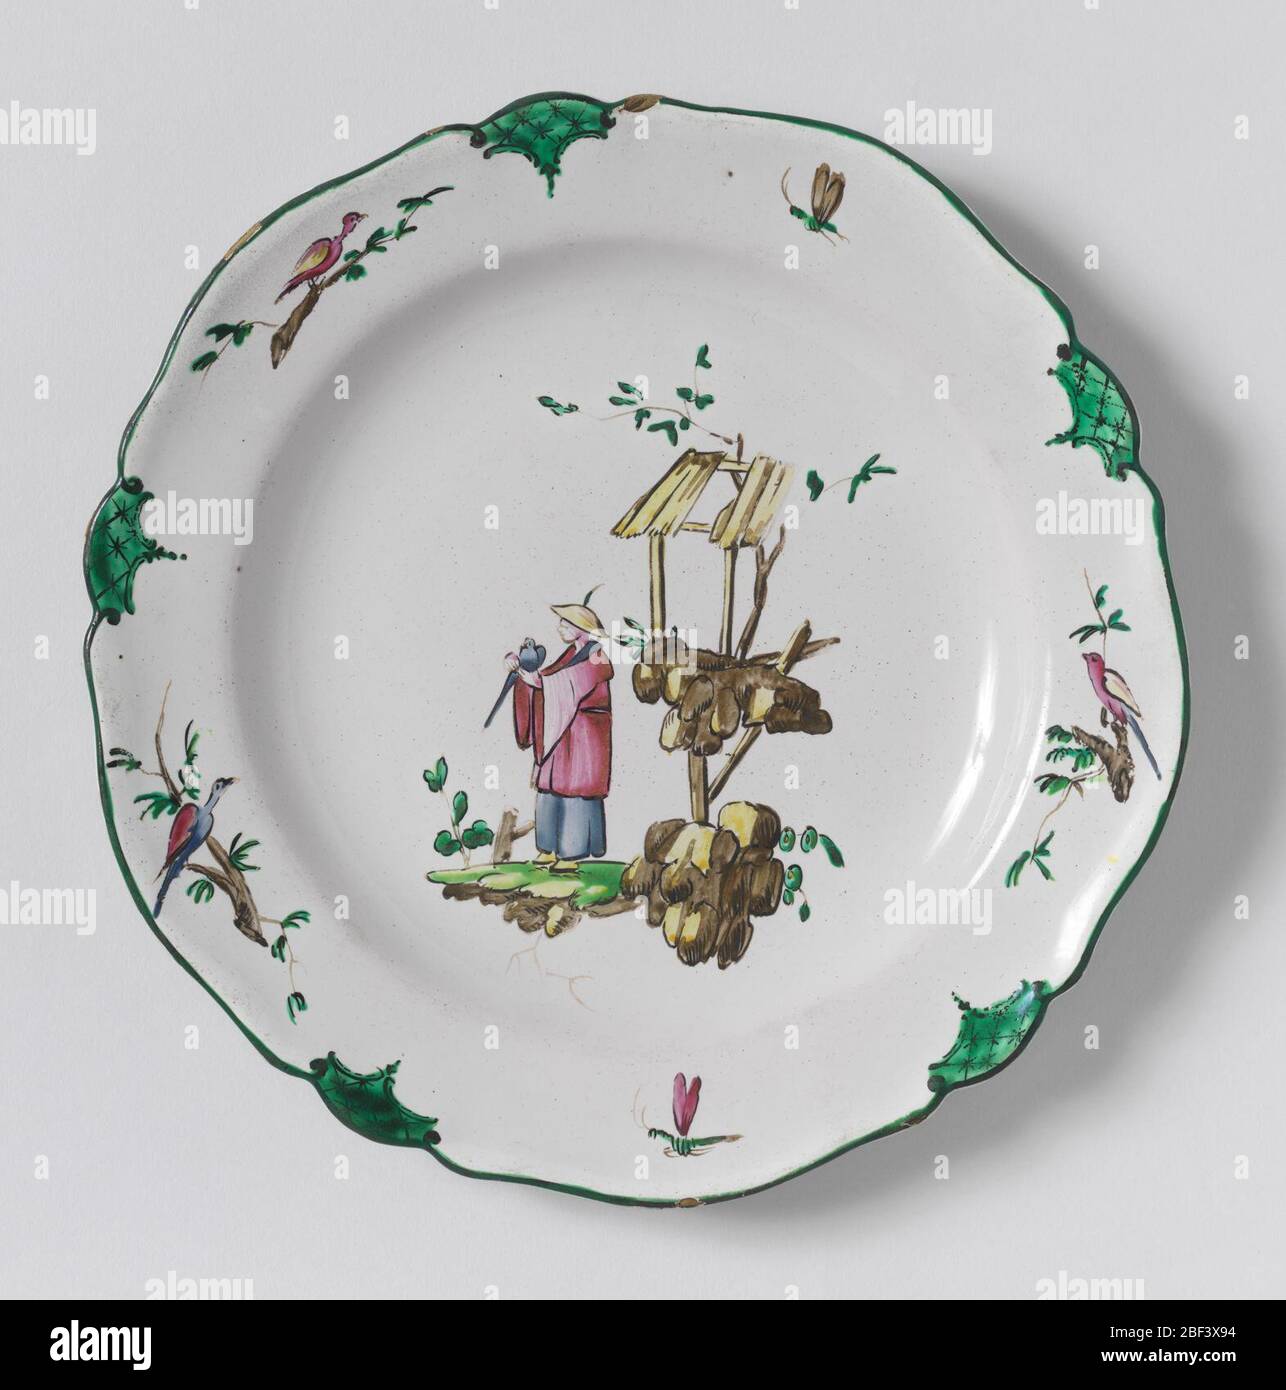 Plate. Circular cavetto, scalloped rim irregularly ten-sided. Chinoiserie decoration showing a manFacing left, holding a birds. At right, rocks and a shelter in brown and yellow. Border has three birds and two flying insects alternating with green scalloped panels. Stock Photo